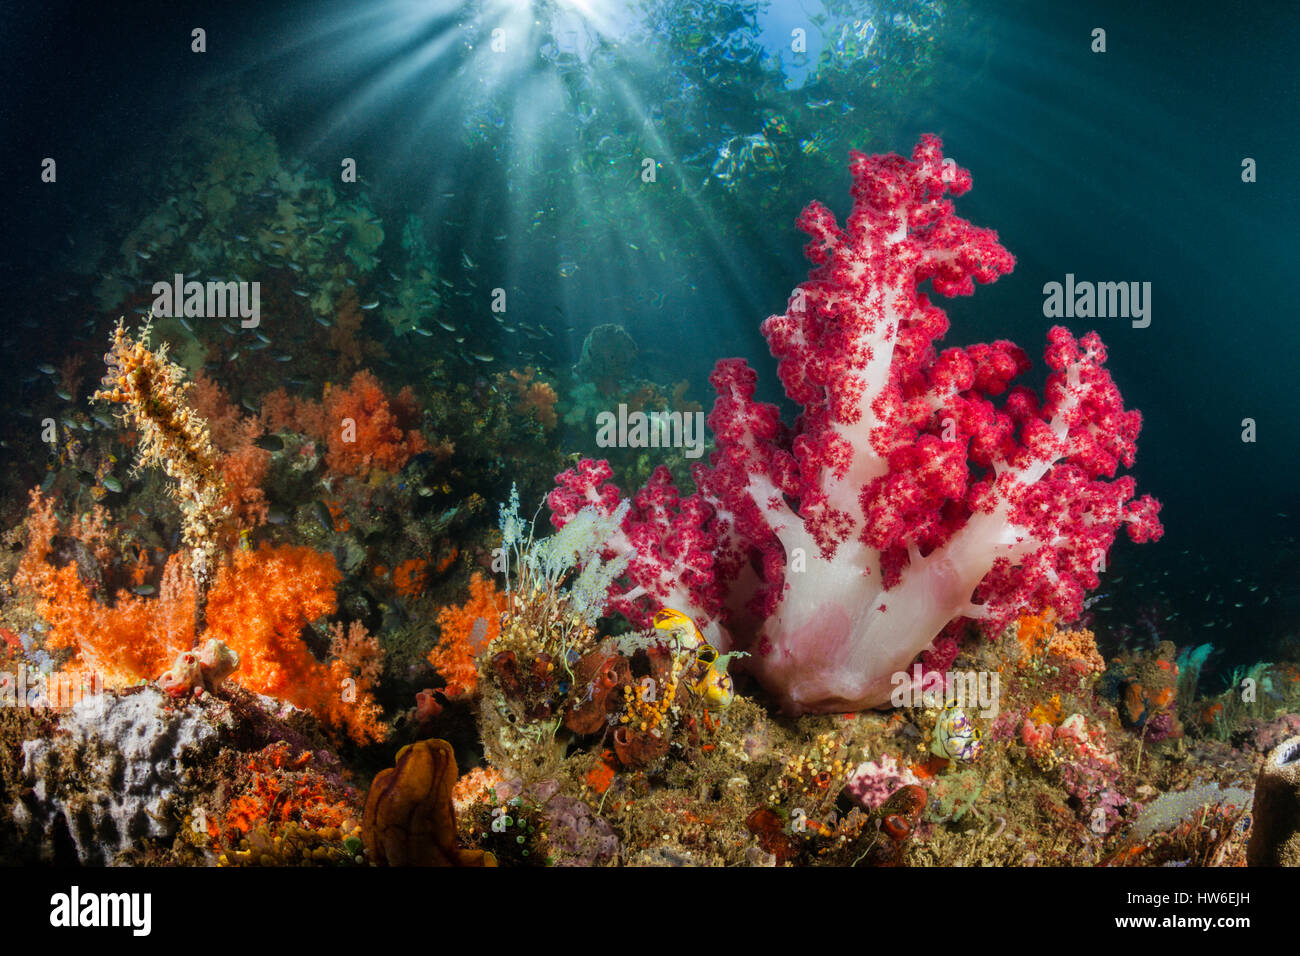 Soft Corals growing near Mangroves, Dendronephthya sp., Raja Ampat, West Papua, Indonesia Stock Photo